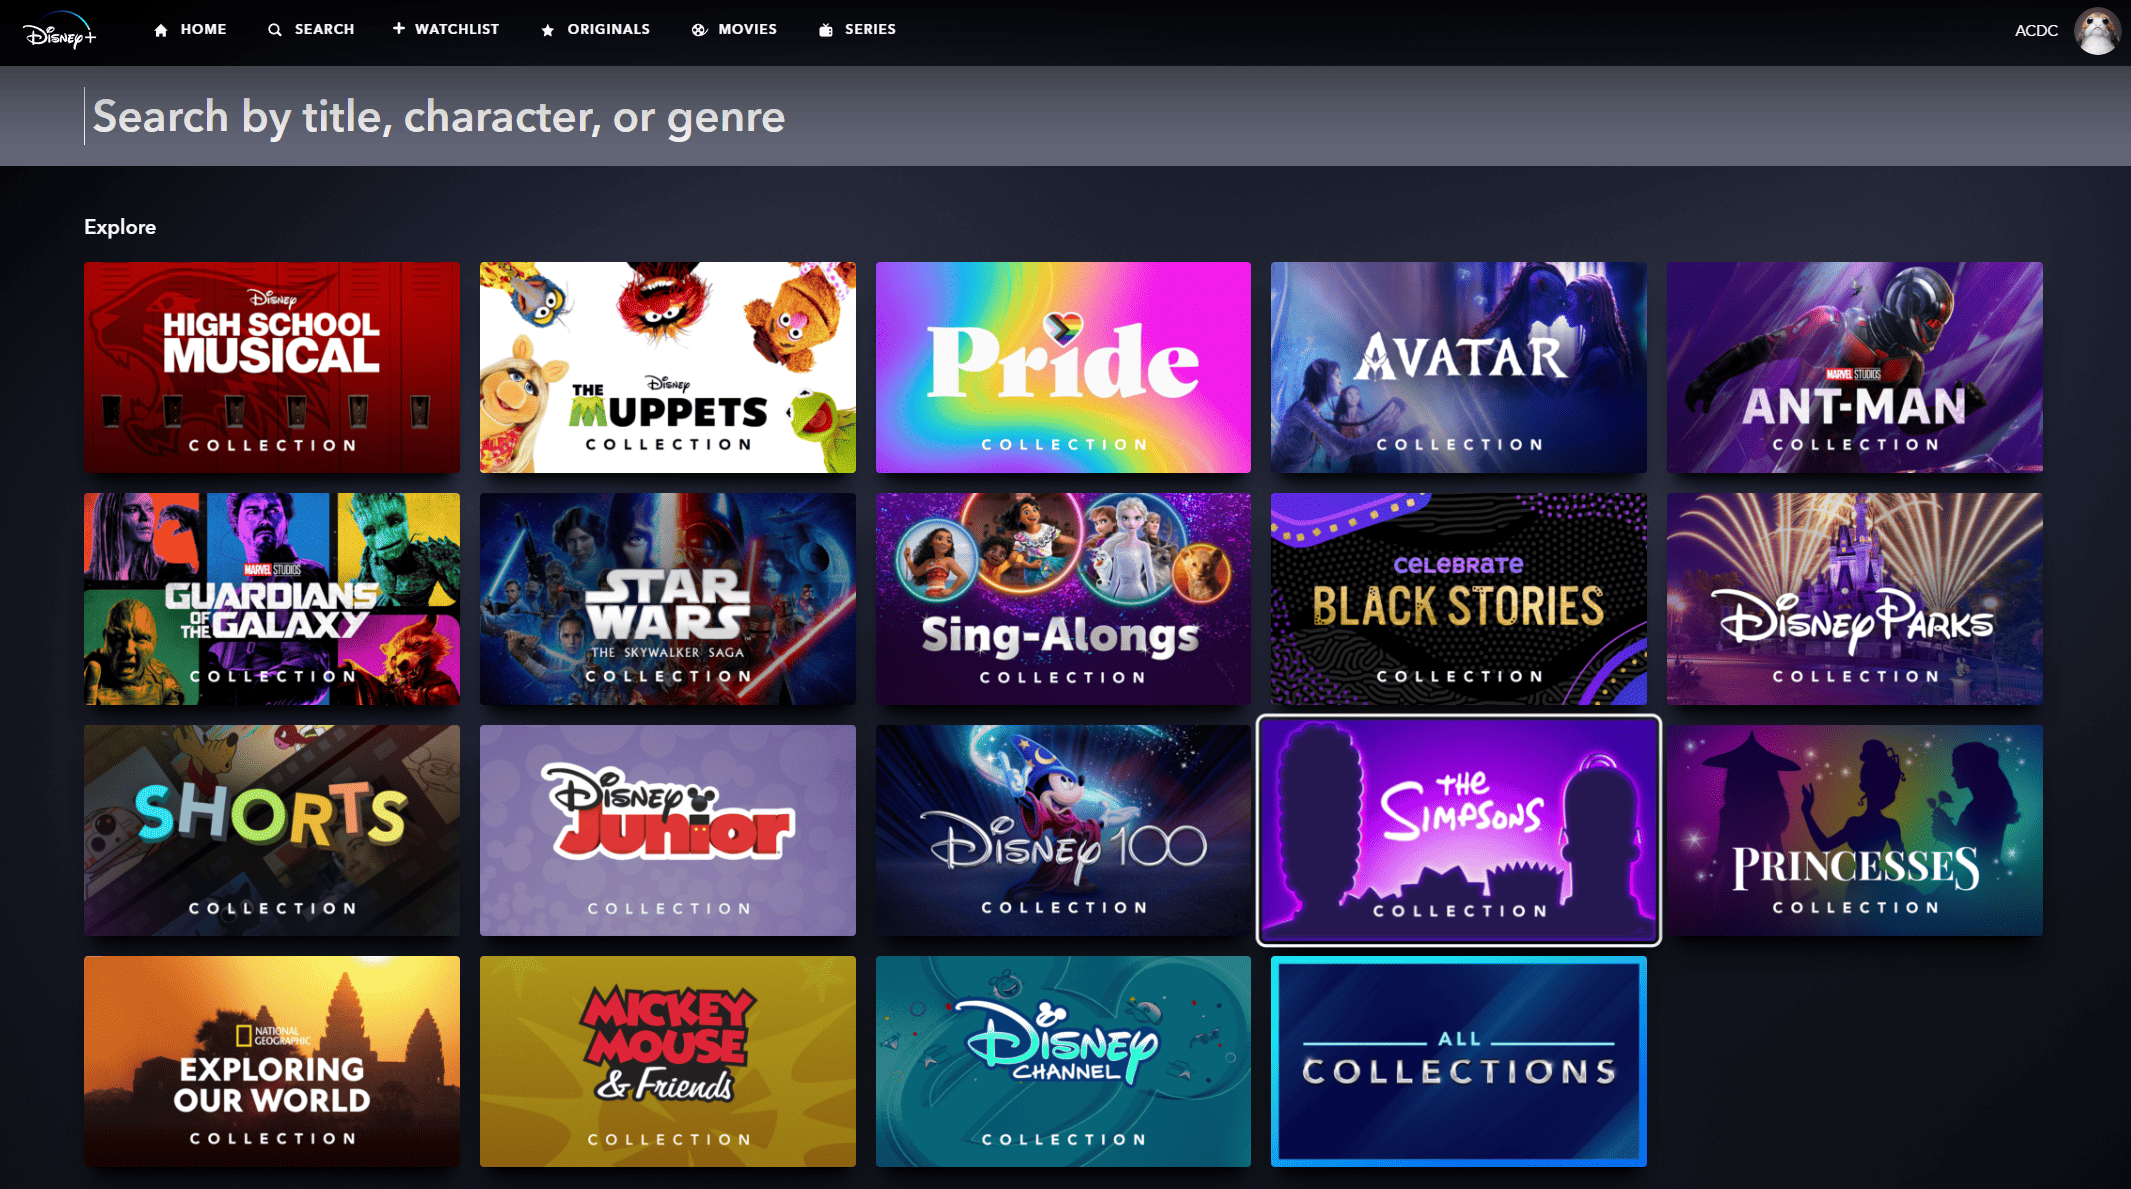 Screenshot of the Search function on Disney+.